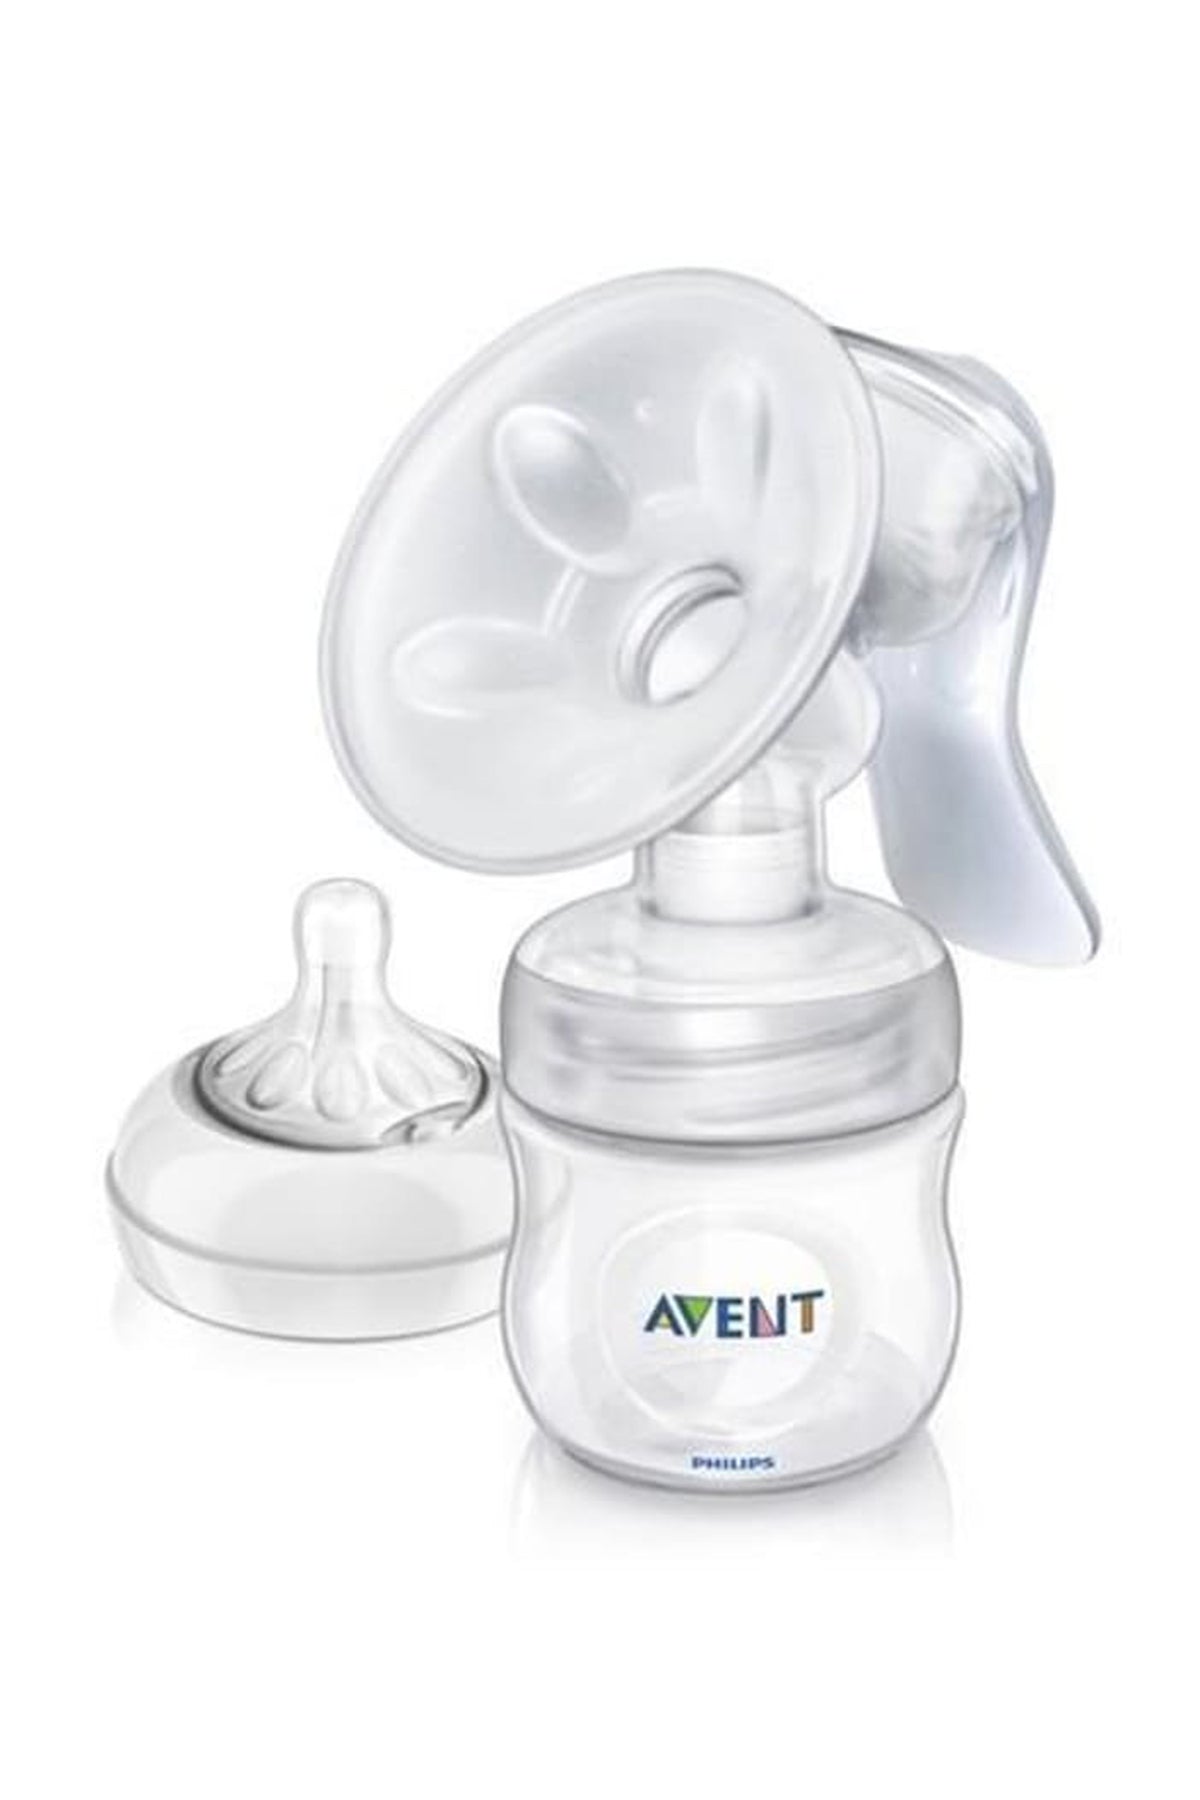 Avent Manual Pump with Bottle